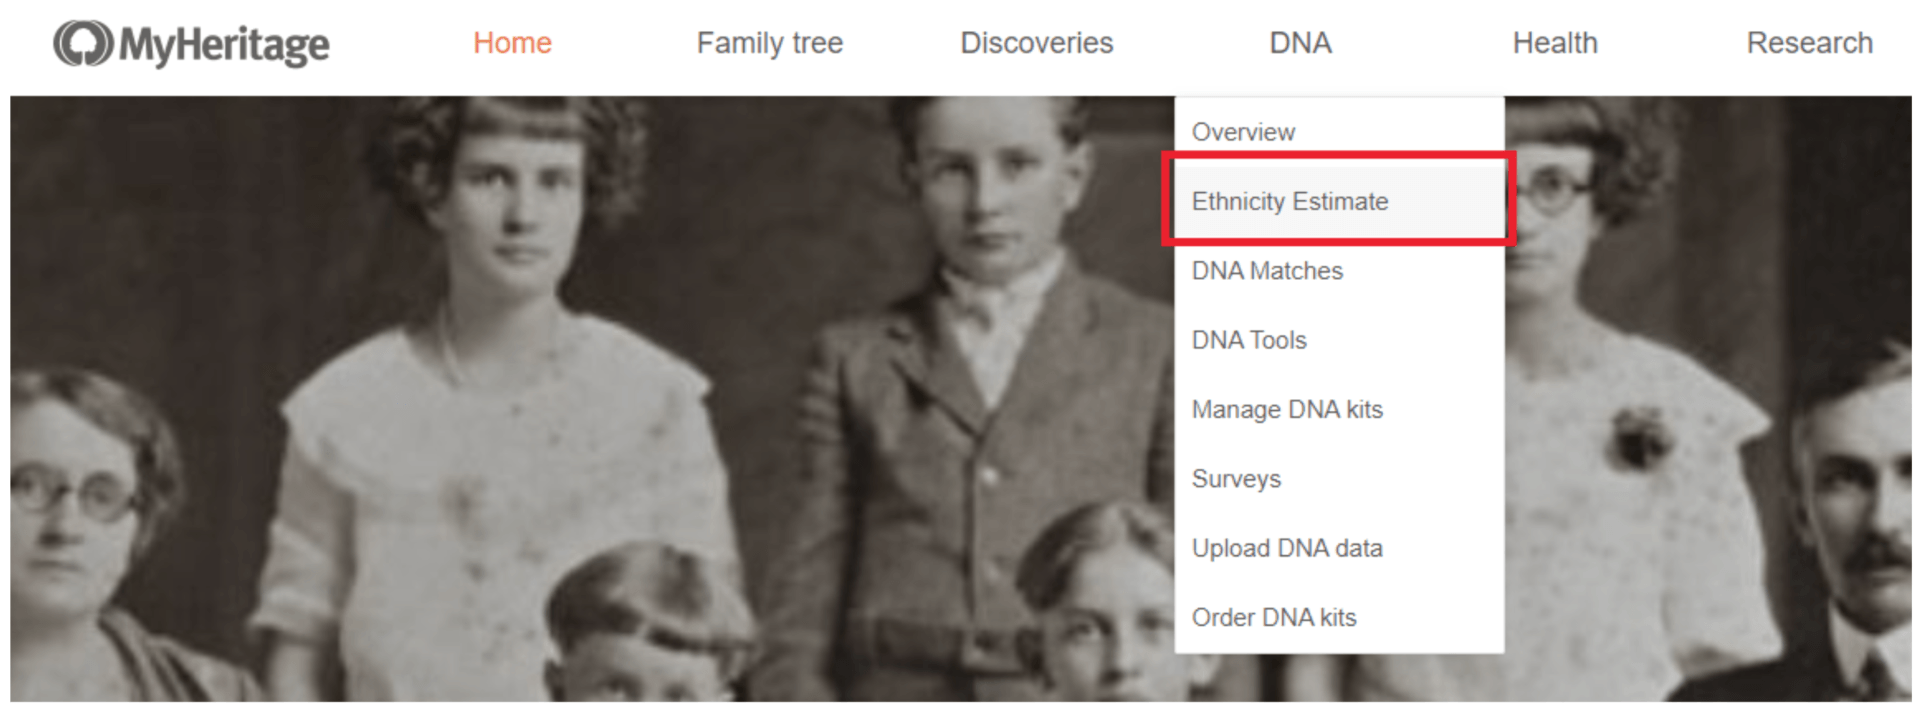 Accessing Genetic Groups on MyHeritage